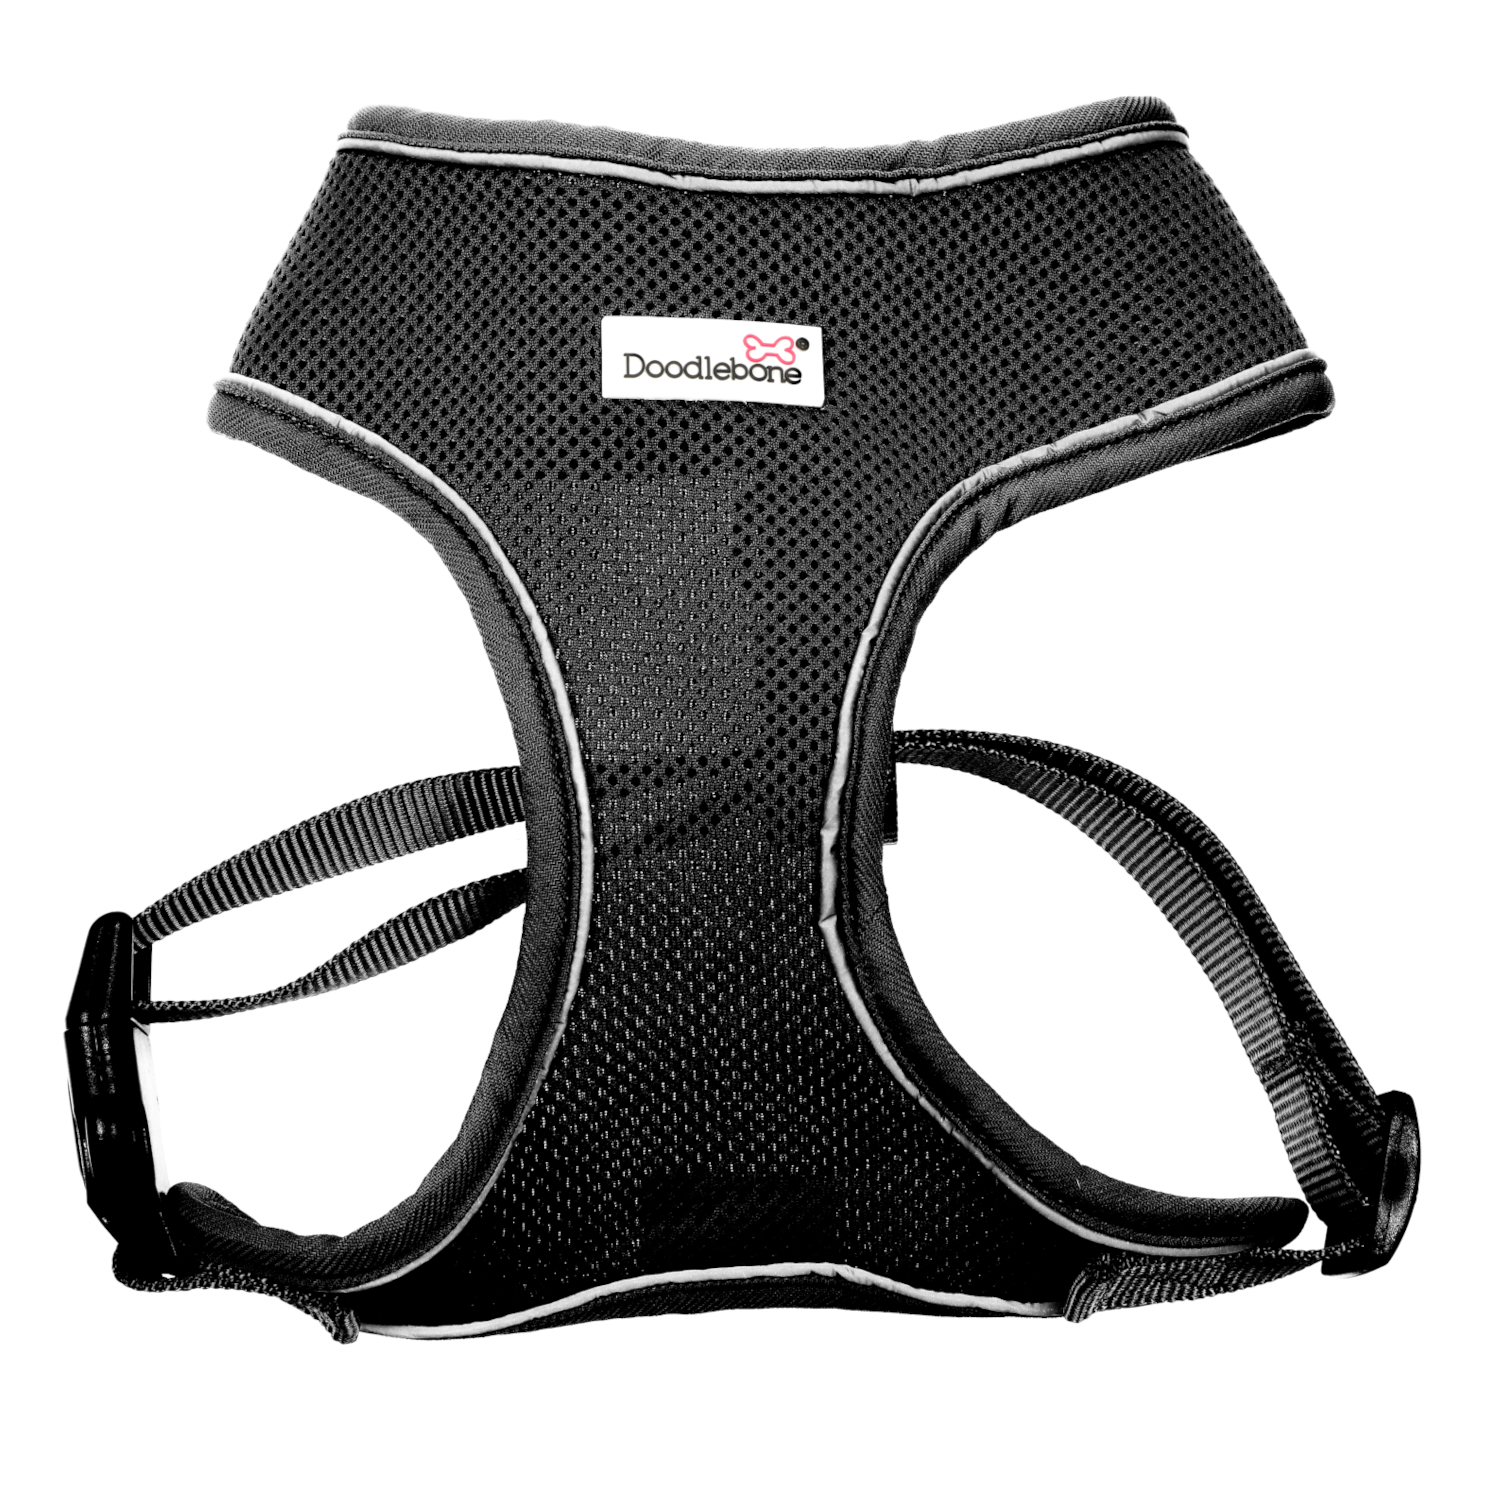 Clearance SALE Doodlebone Soft Strong Air Mesh Dog Harness.last few remaining